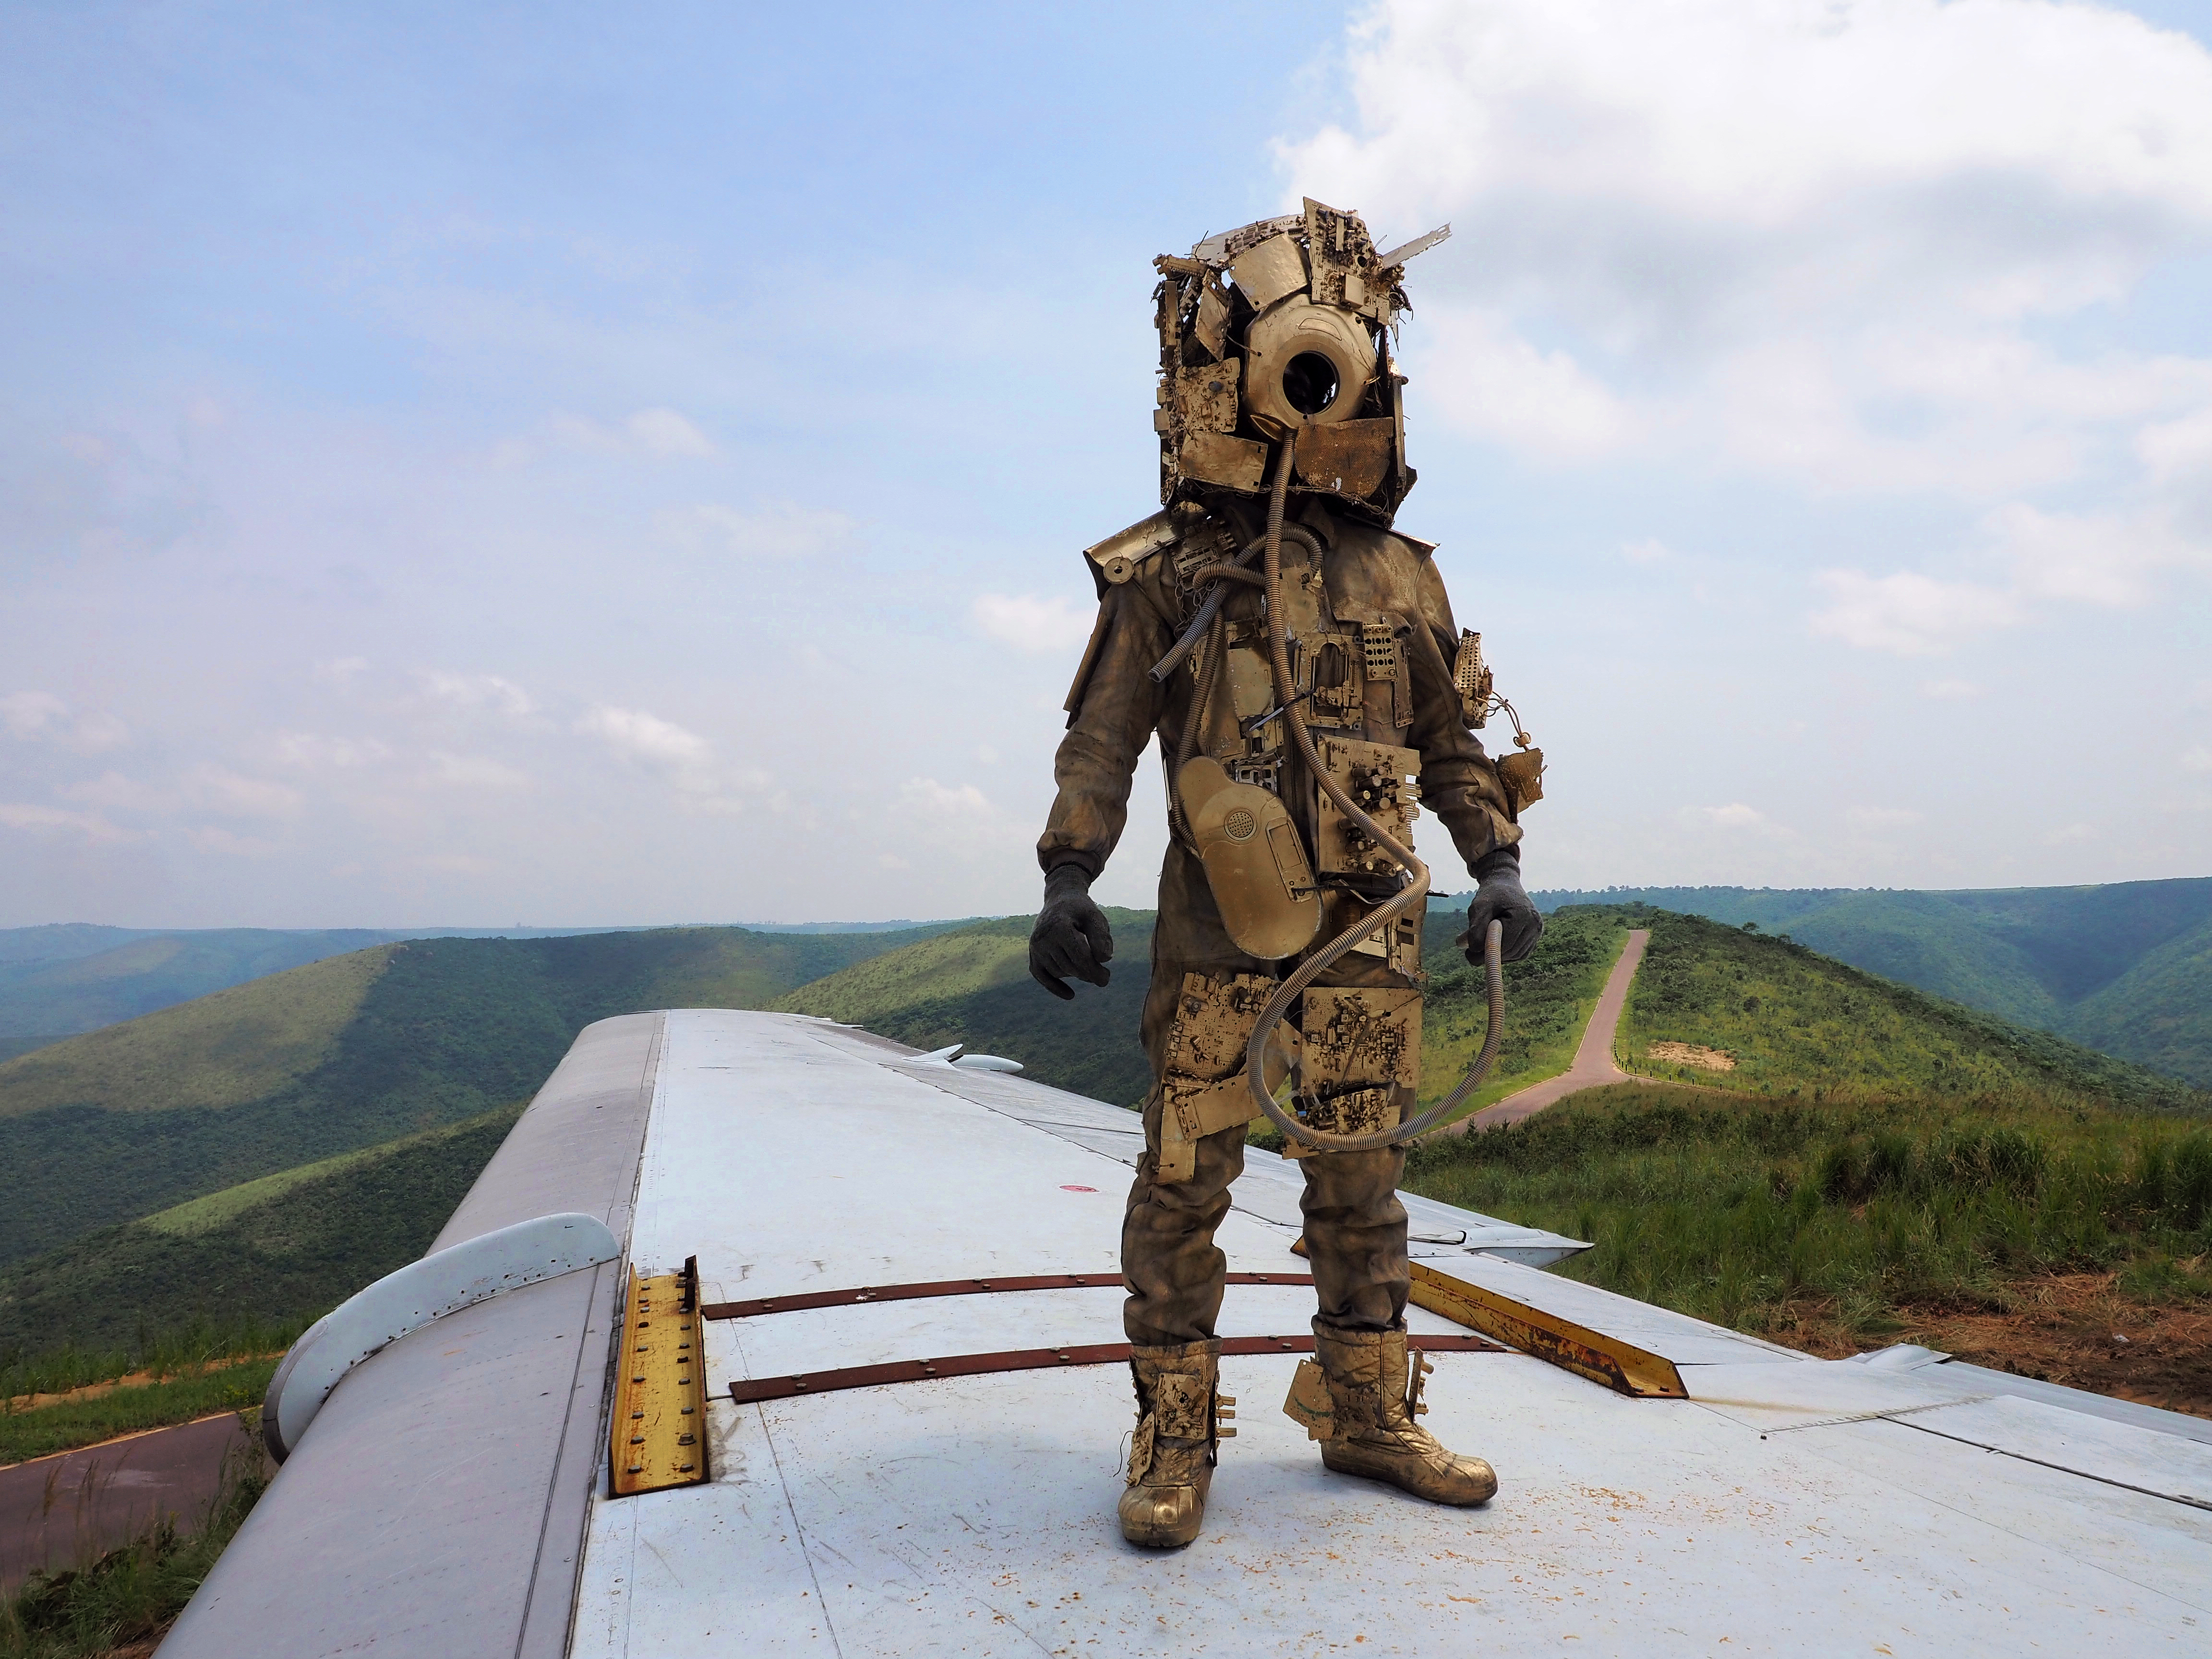 A humanoid figure in a gold metallic makeshift space suit and helmet stands on an airplane's wing with a landscape beyond. Green rolling hills and paths can be seen with a slightly blue cloudy sky in the image's background.